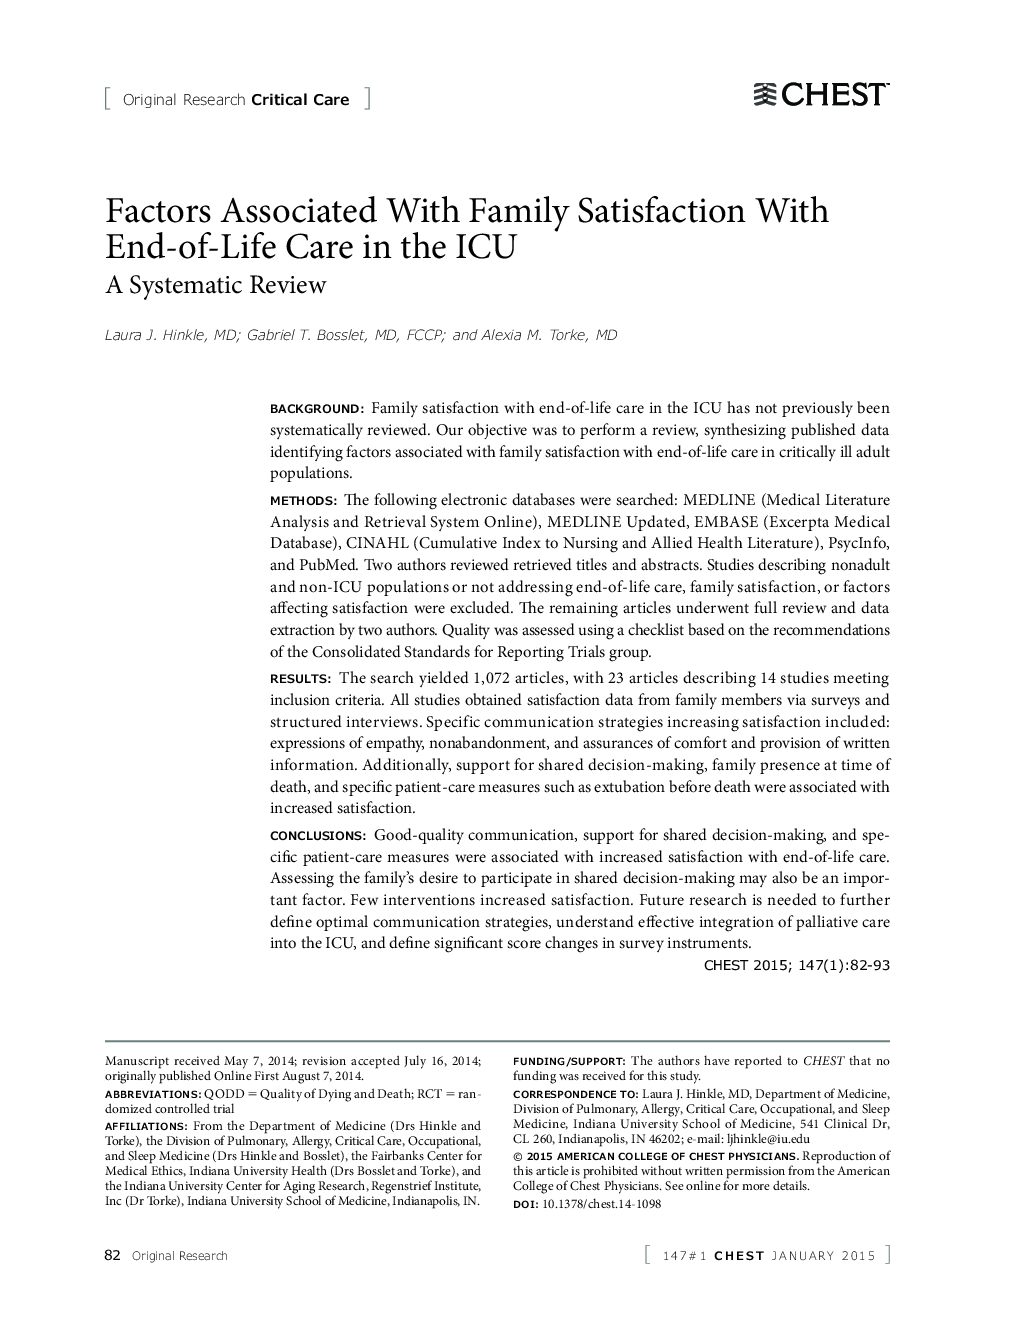 Factors Associated With Family Satisfaction With End-of-Life Care in the ICU